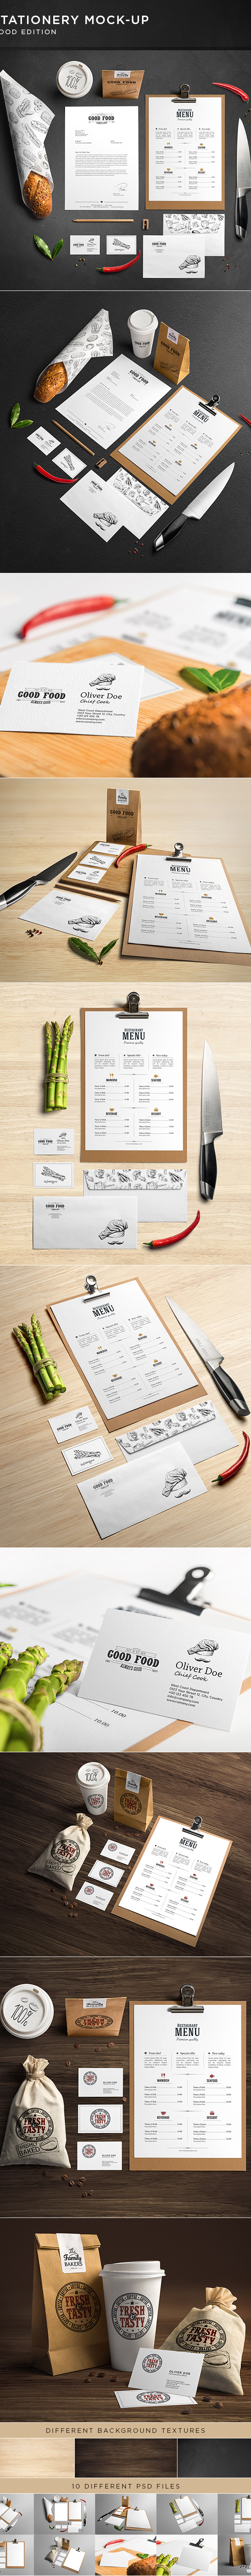 brand business card corporate Documents eco envelope identity letterhead mock up mock-up mock-ups preview paper pencil